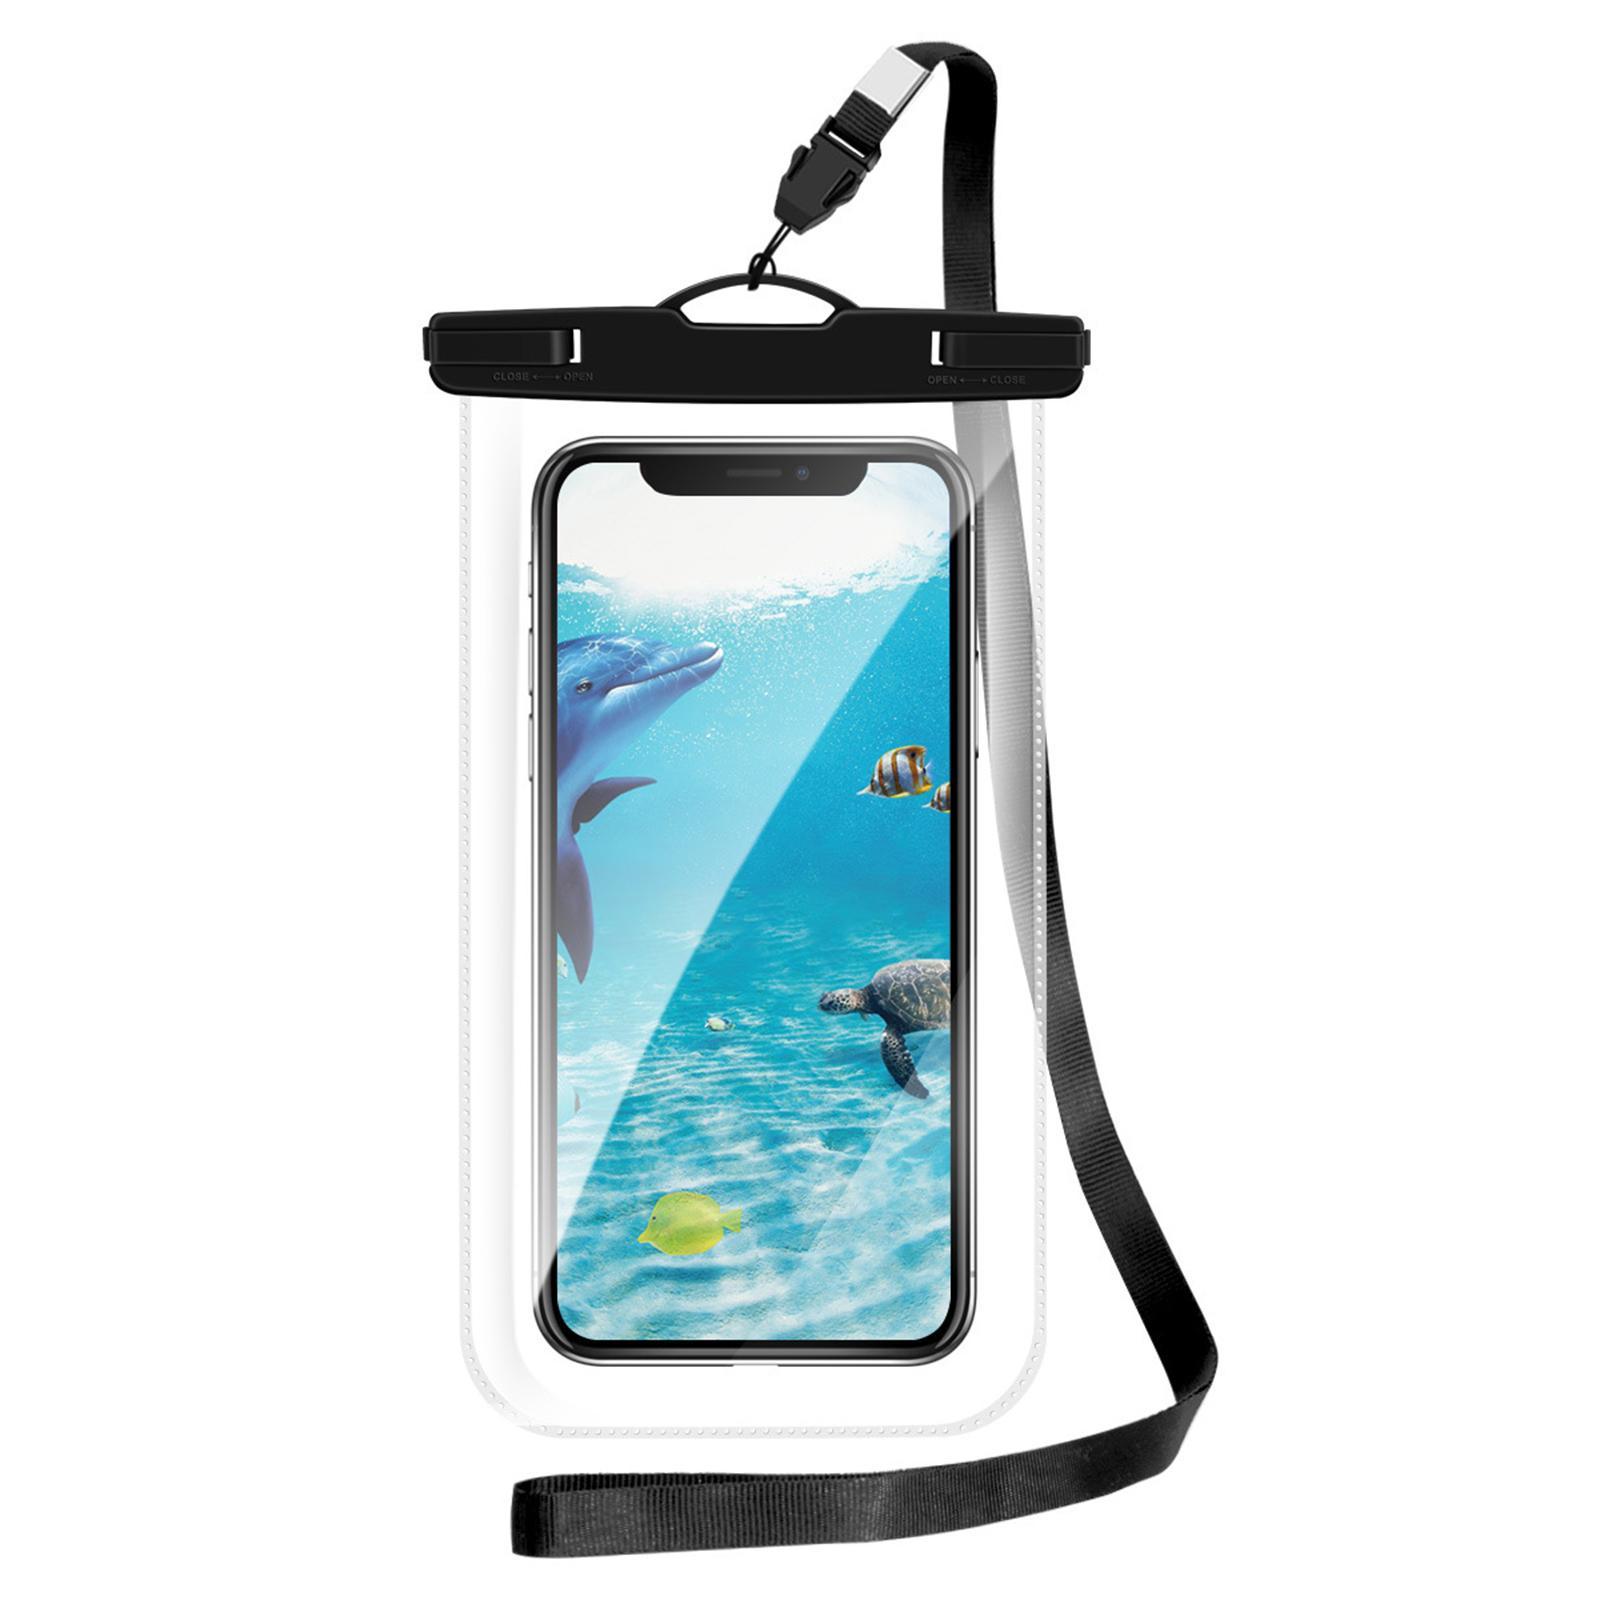 Secure On The Go: Attaching A Lanyard To Your Waterproof Phone Bag